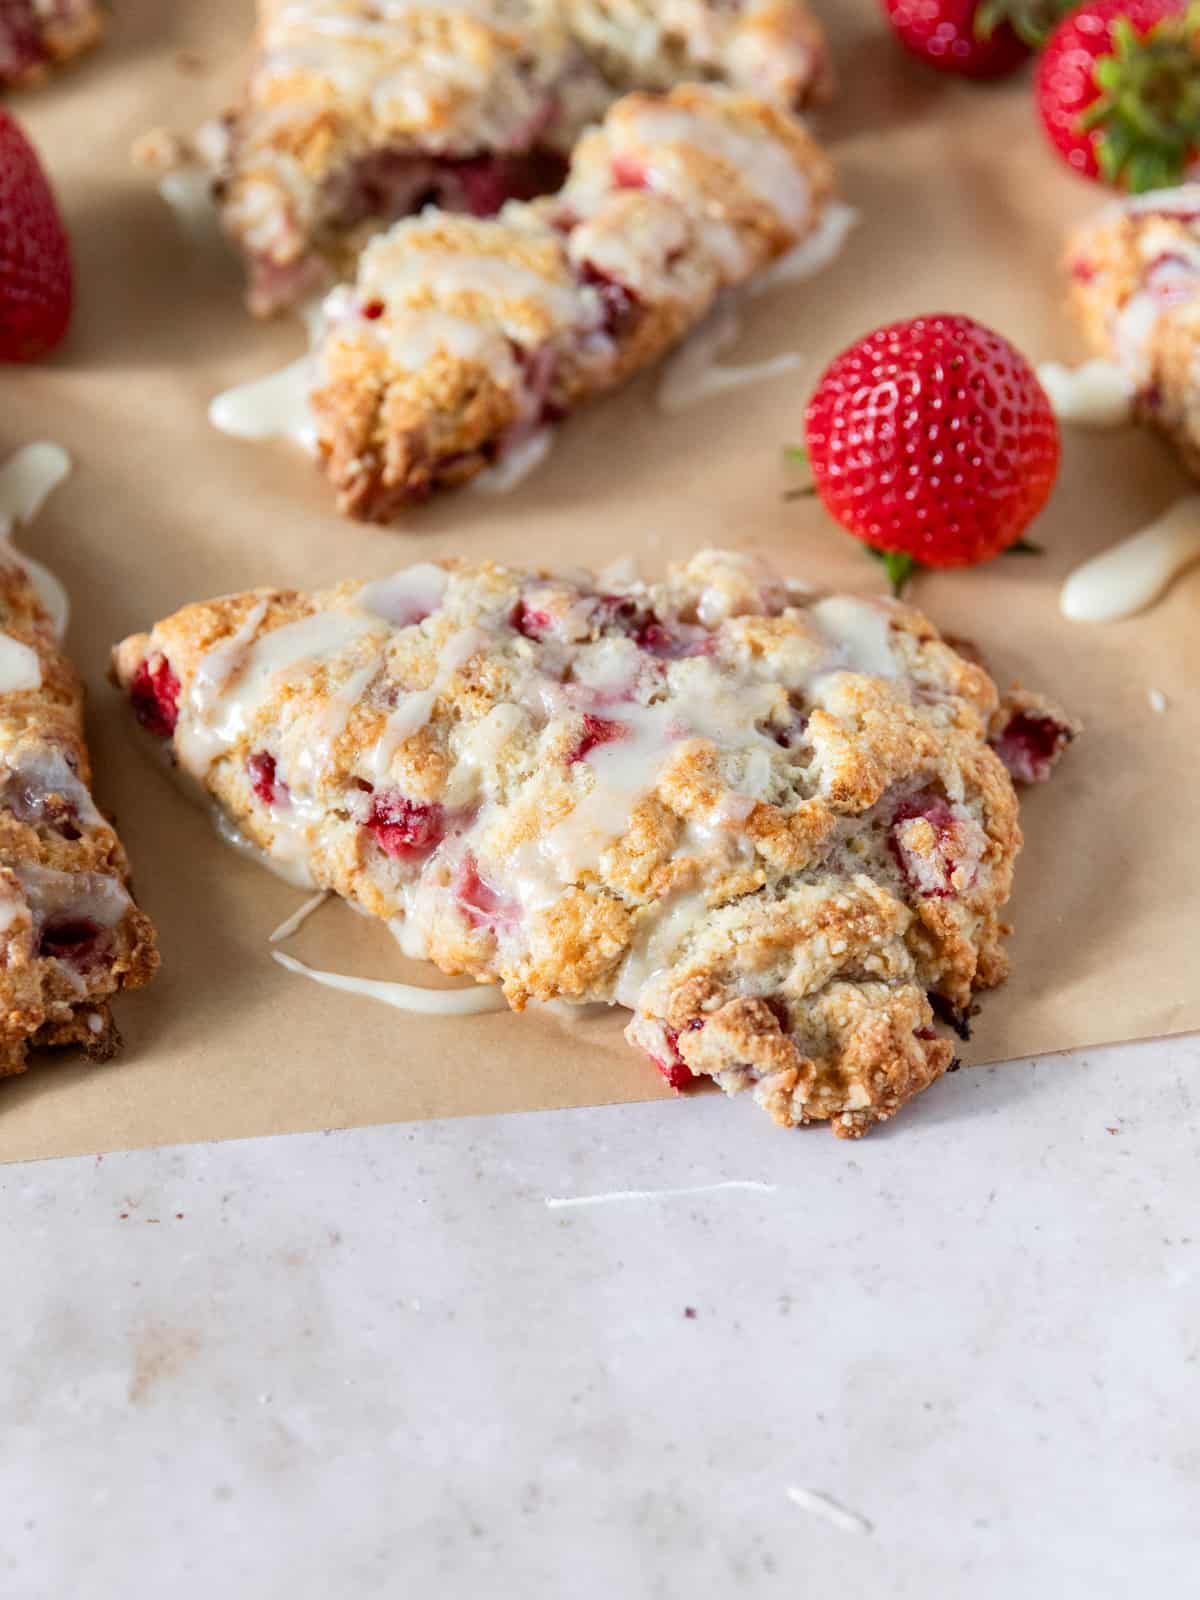 Strawberry scones on a piece of parchment paper drizzled with vanilla glaze and surrounded by fresh strawberries.